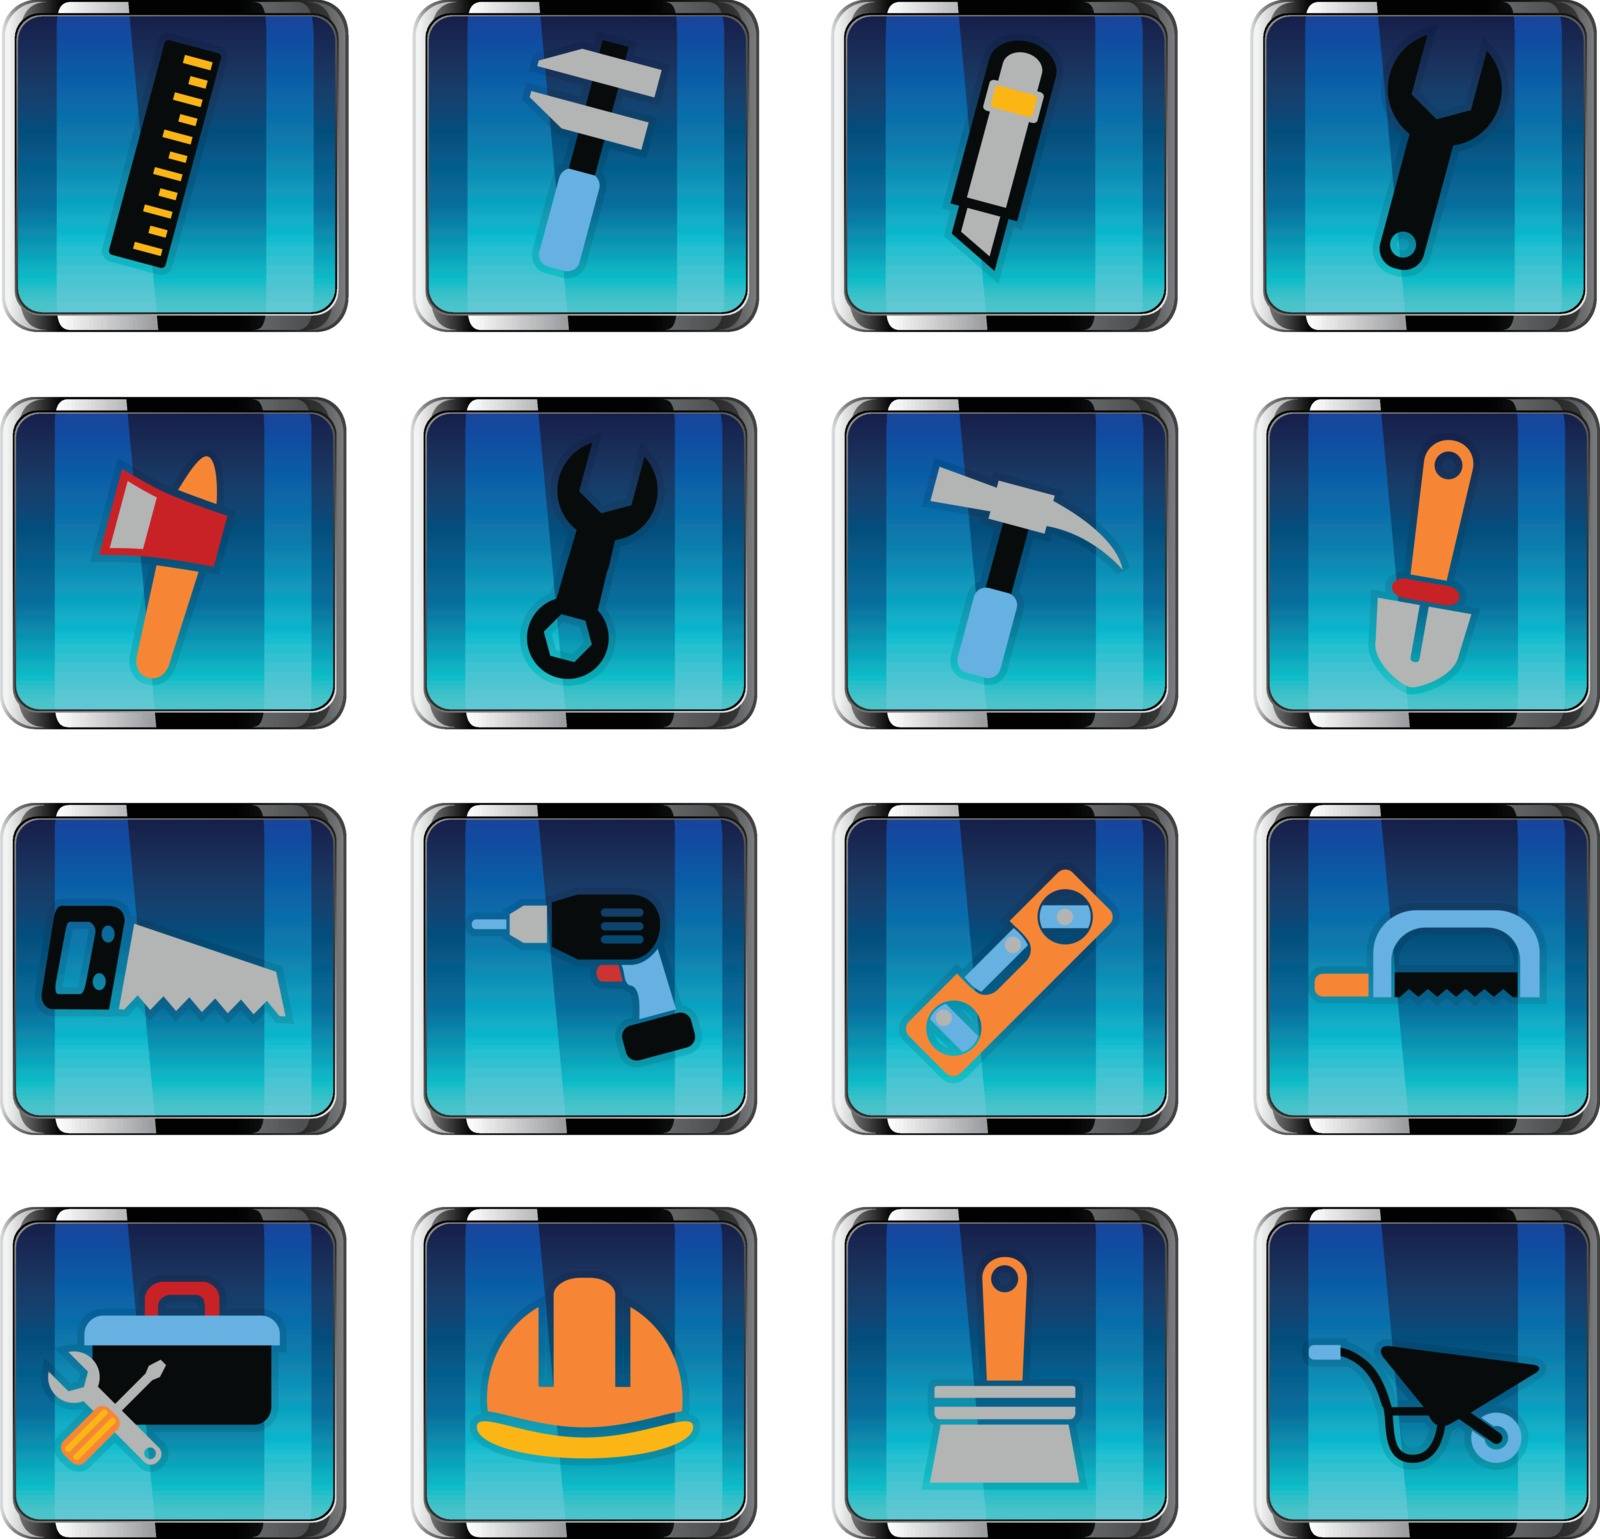 work tools web icons for user interface design